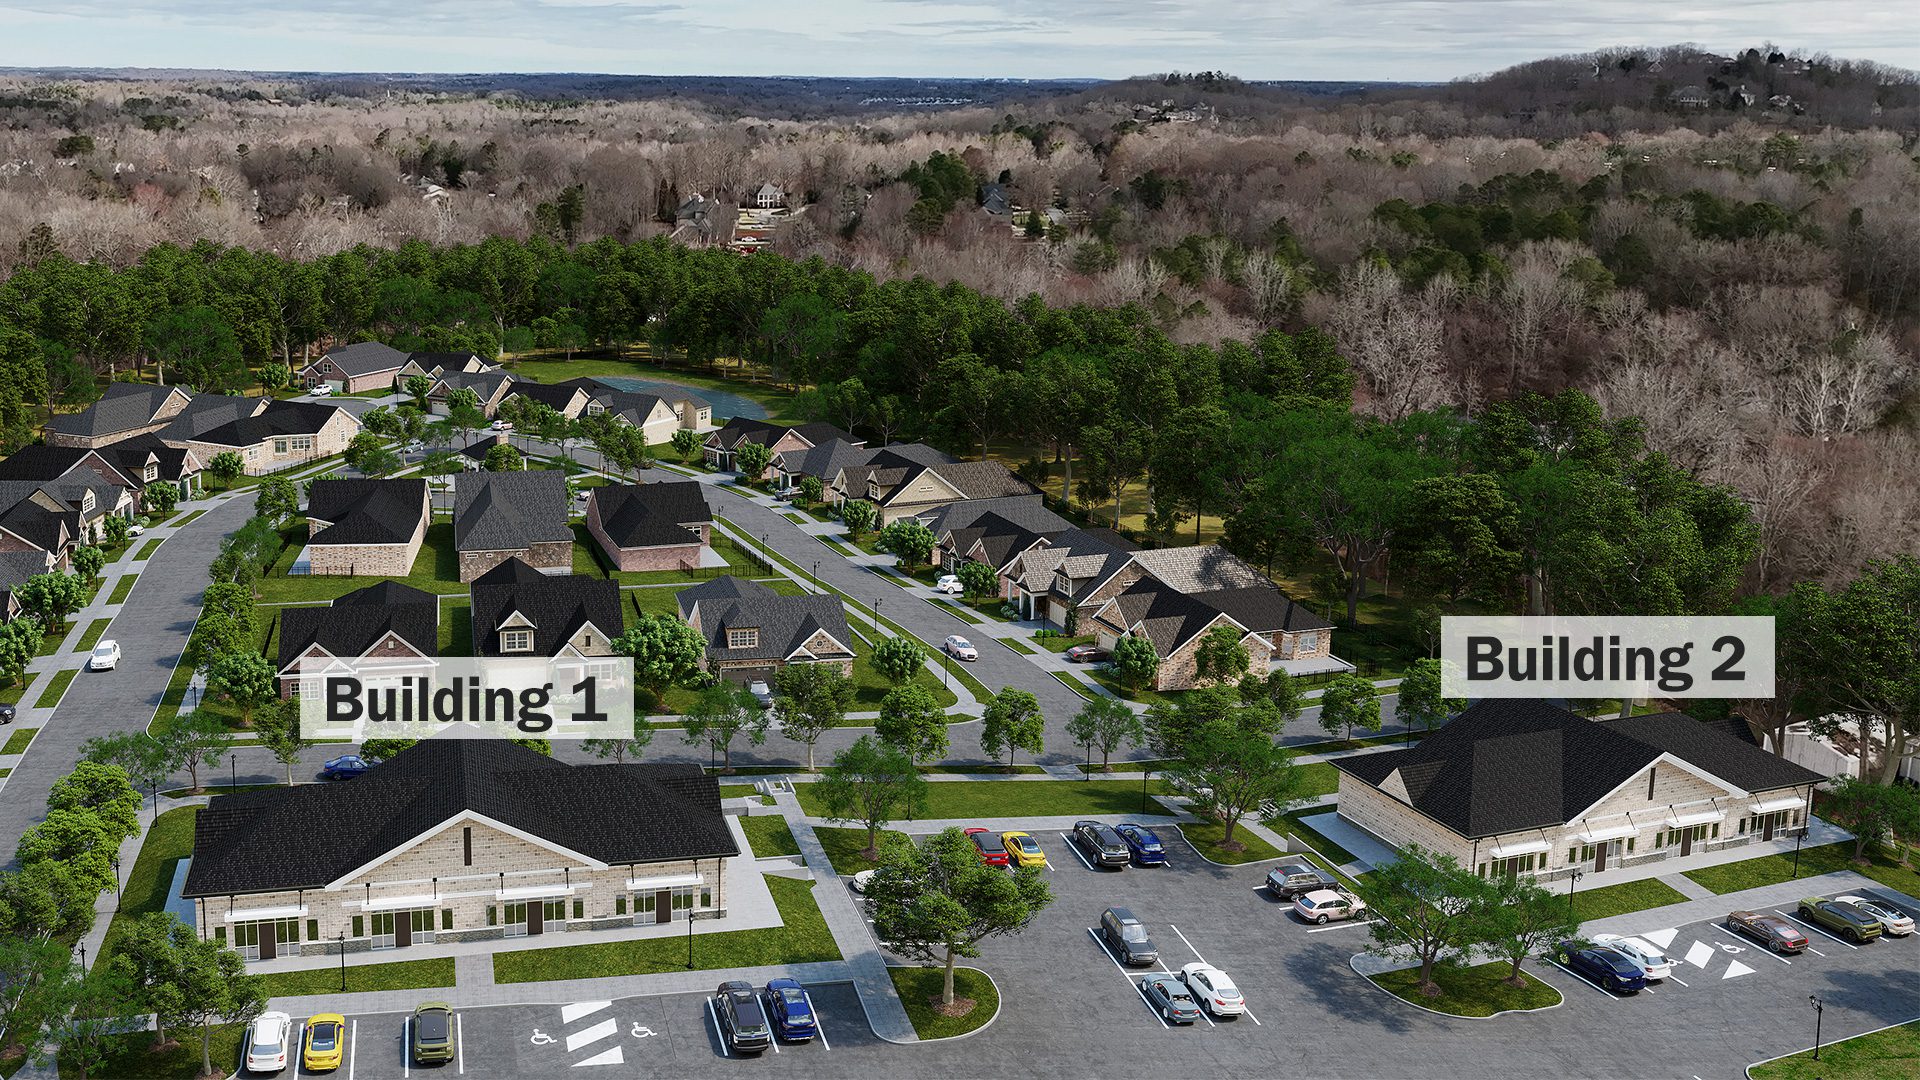 New Hope Village commercial buildings in Gastonia aerial rendering with dense housing. Building 1 and Building 2 labeled